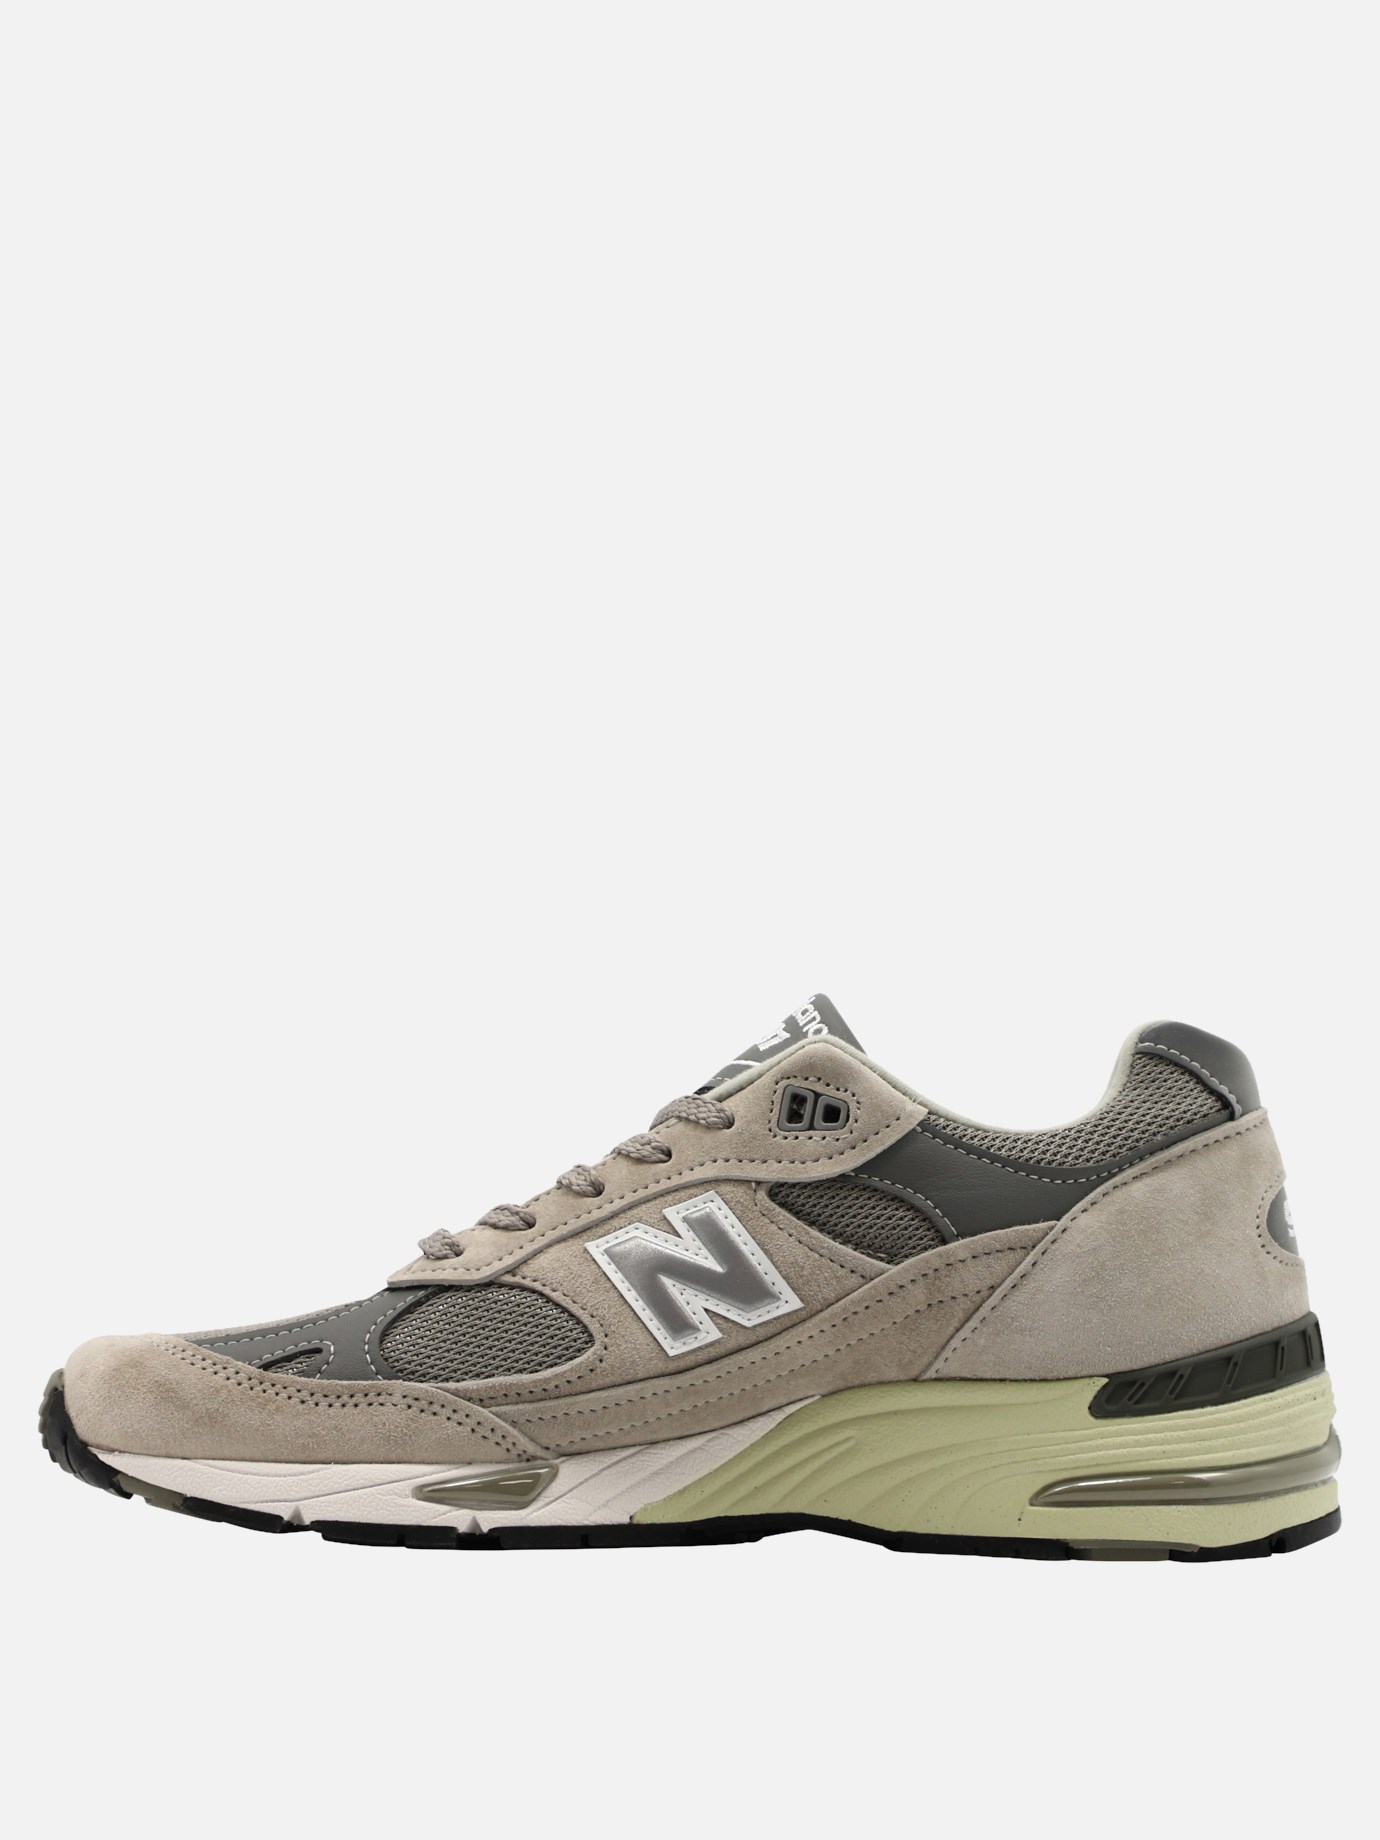 Sneaker  991  by New Balance